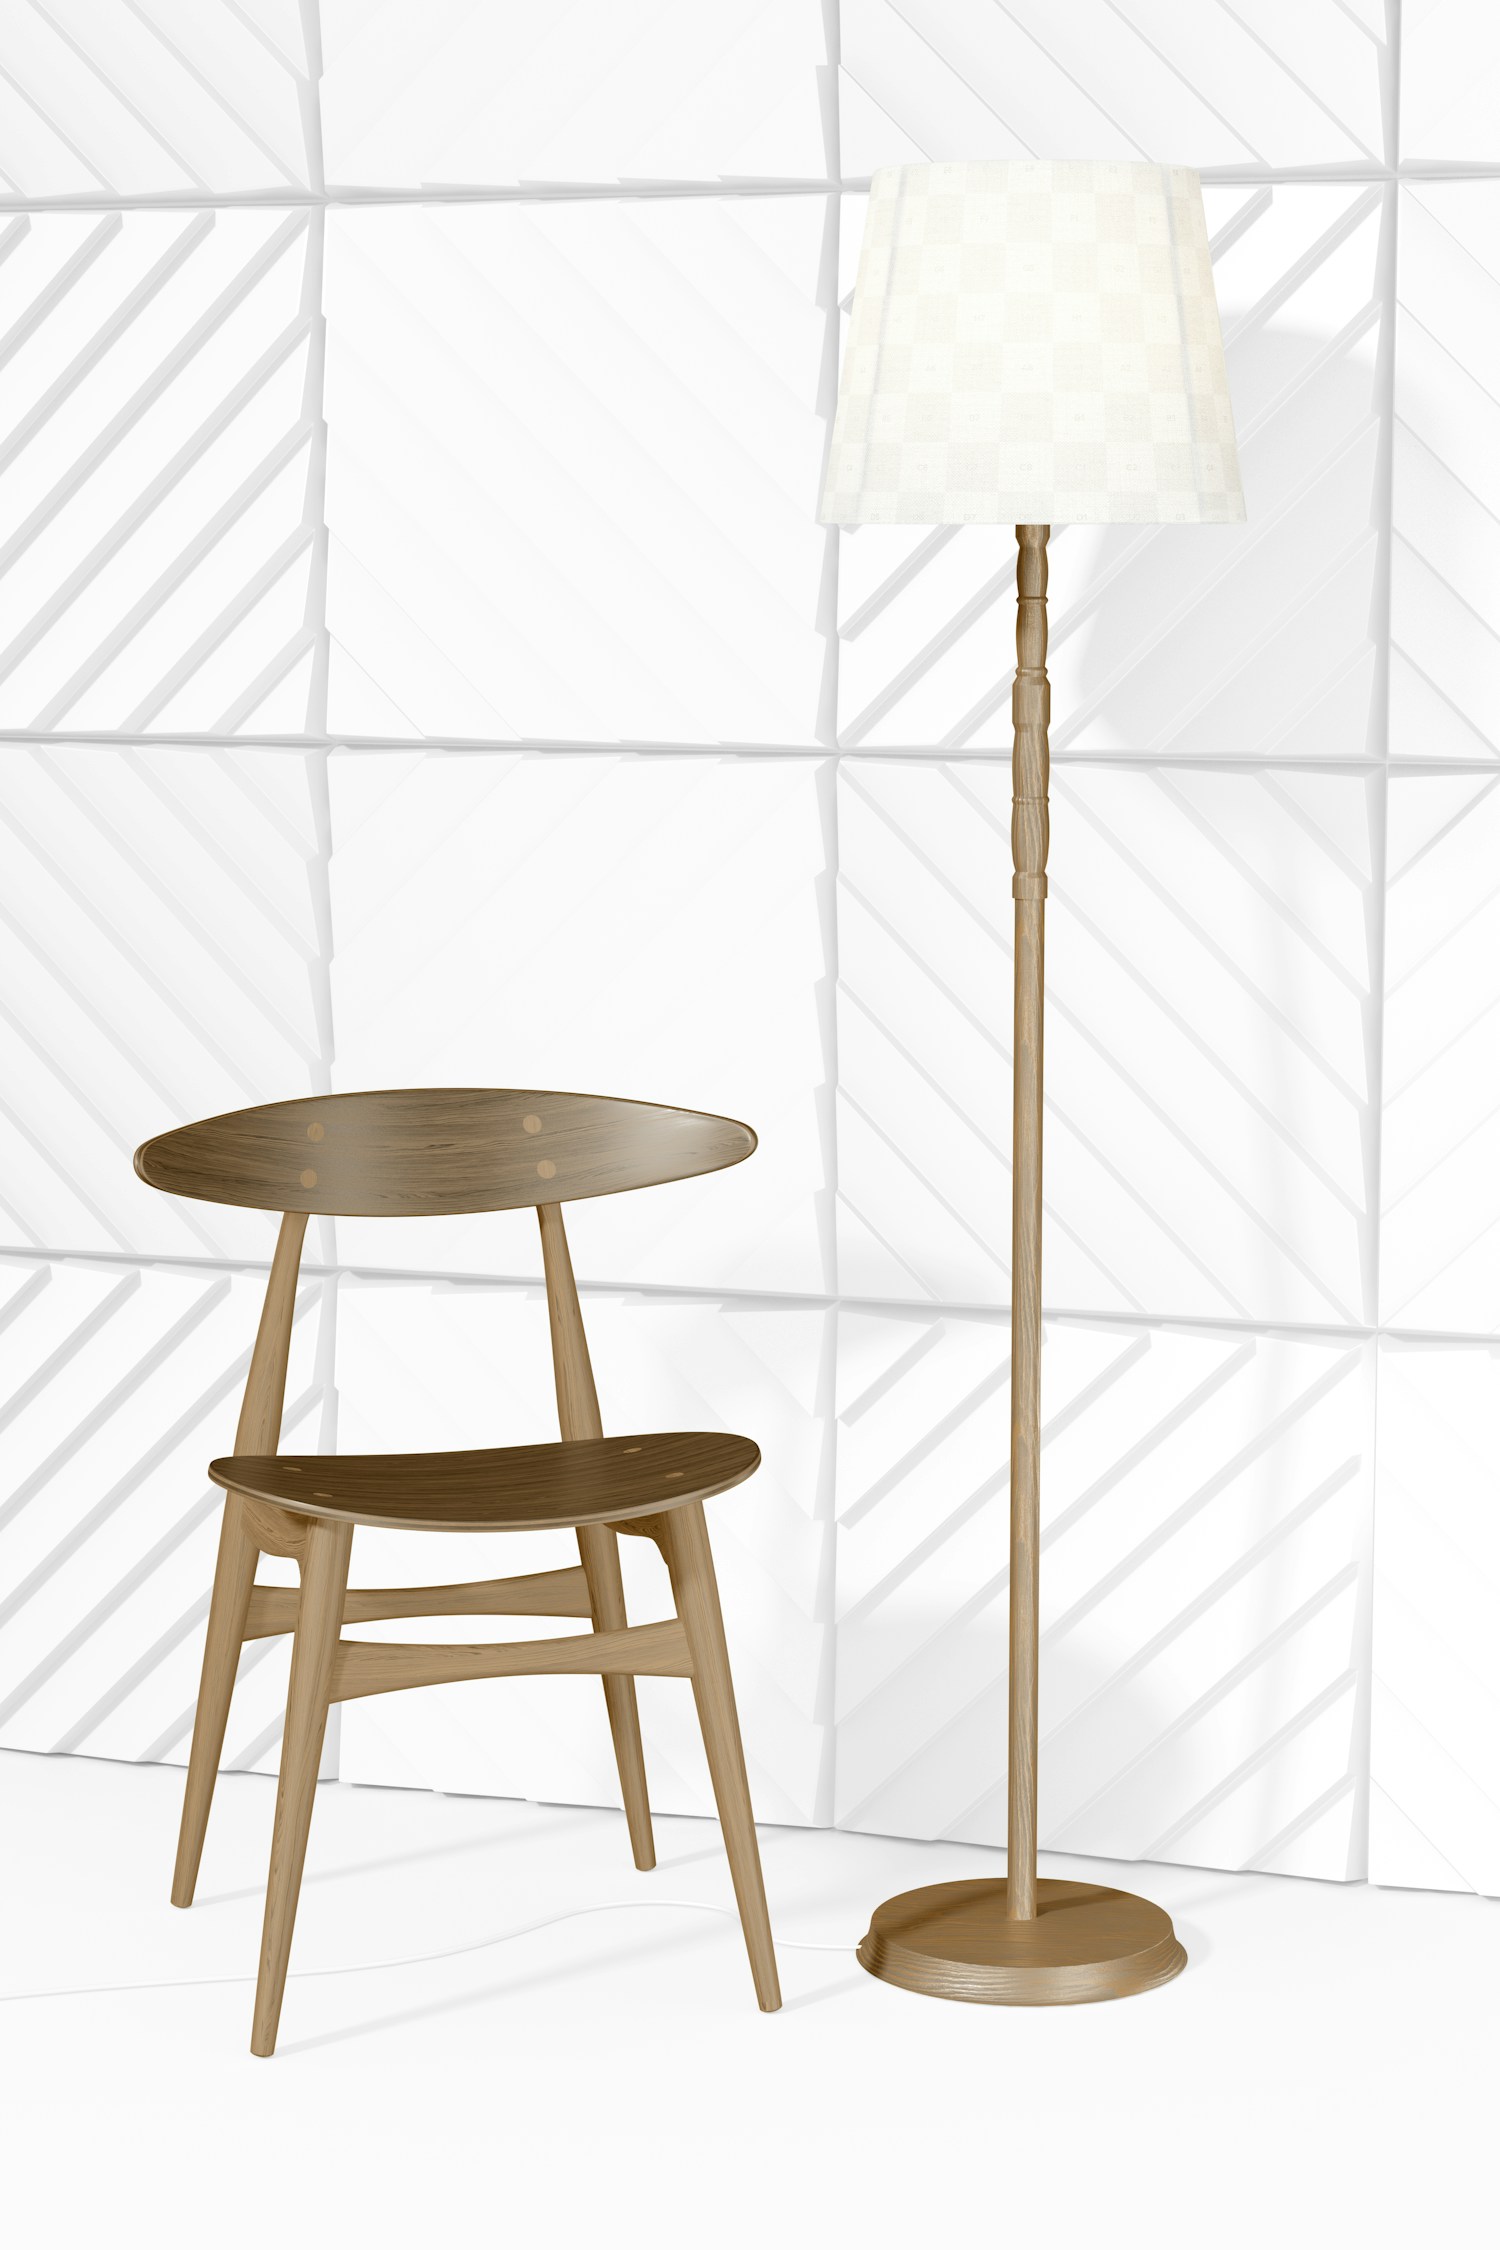 Floor Lamp with Wooden Chair Mockup